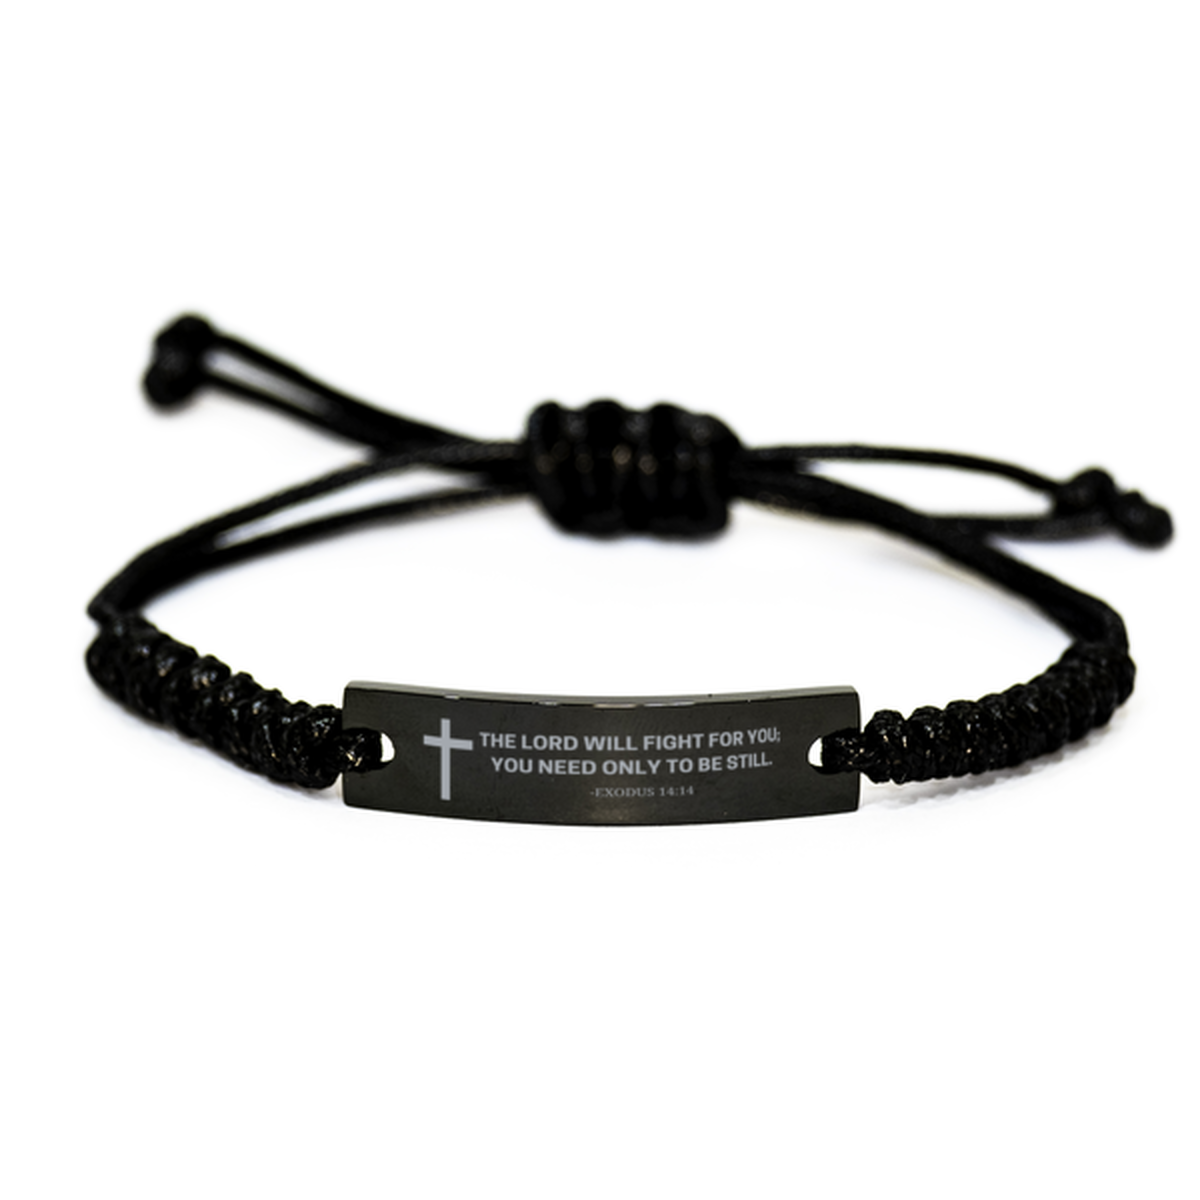 Baptism Gifts For Teenage Boys Girls, Christian Bible Verse Black Rope Bracelet, The Lord will fight for you, Catholic Confirmation Gifts for Son, Godson, Grandson, Nephew